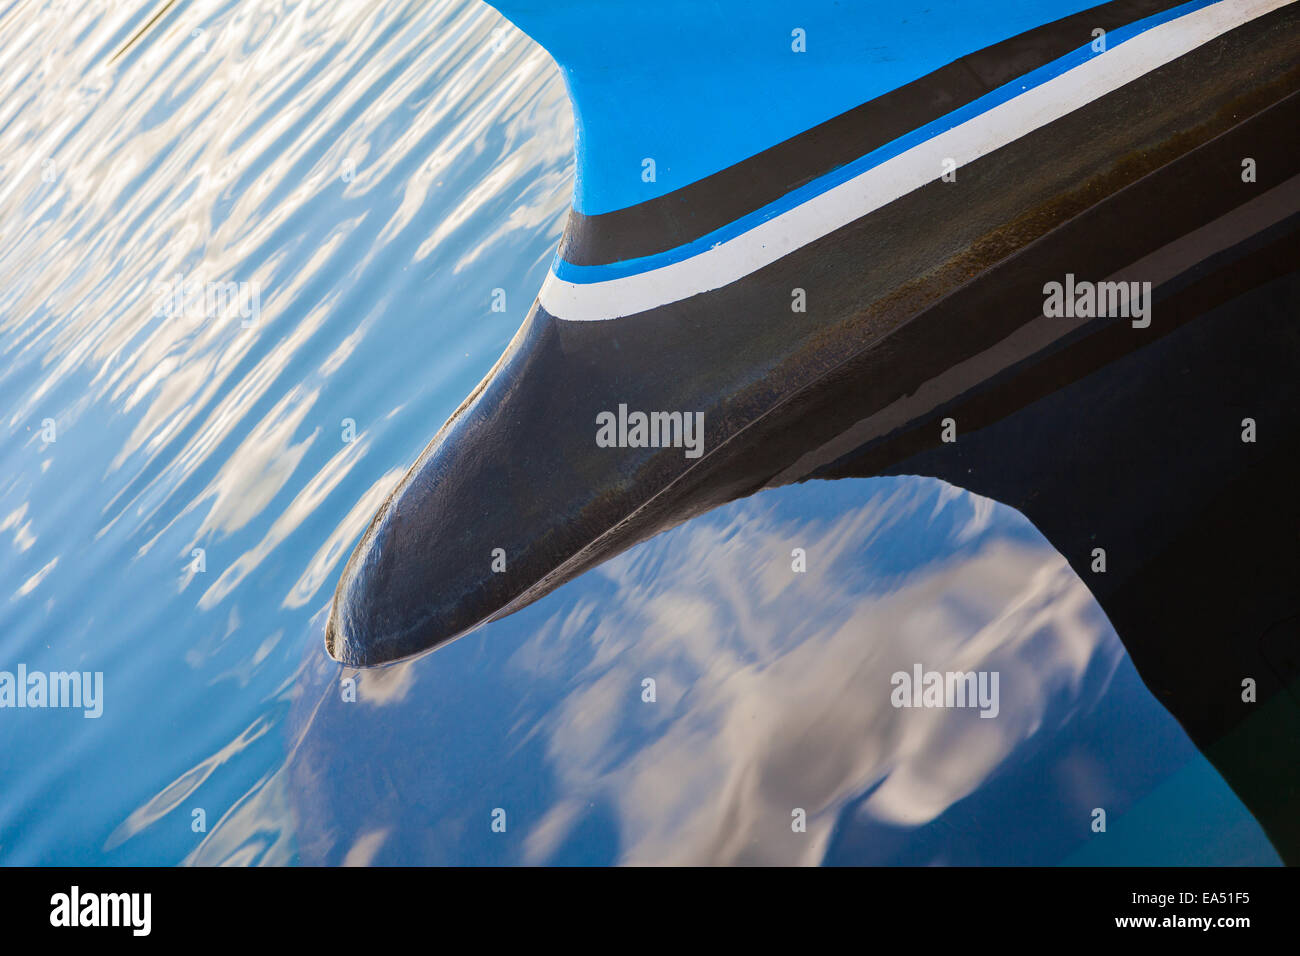 Abstract image of a bulbous bow on a small commercial fishing boat, Nanaimo, British Columbia. Stock Photo